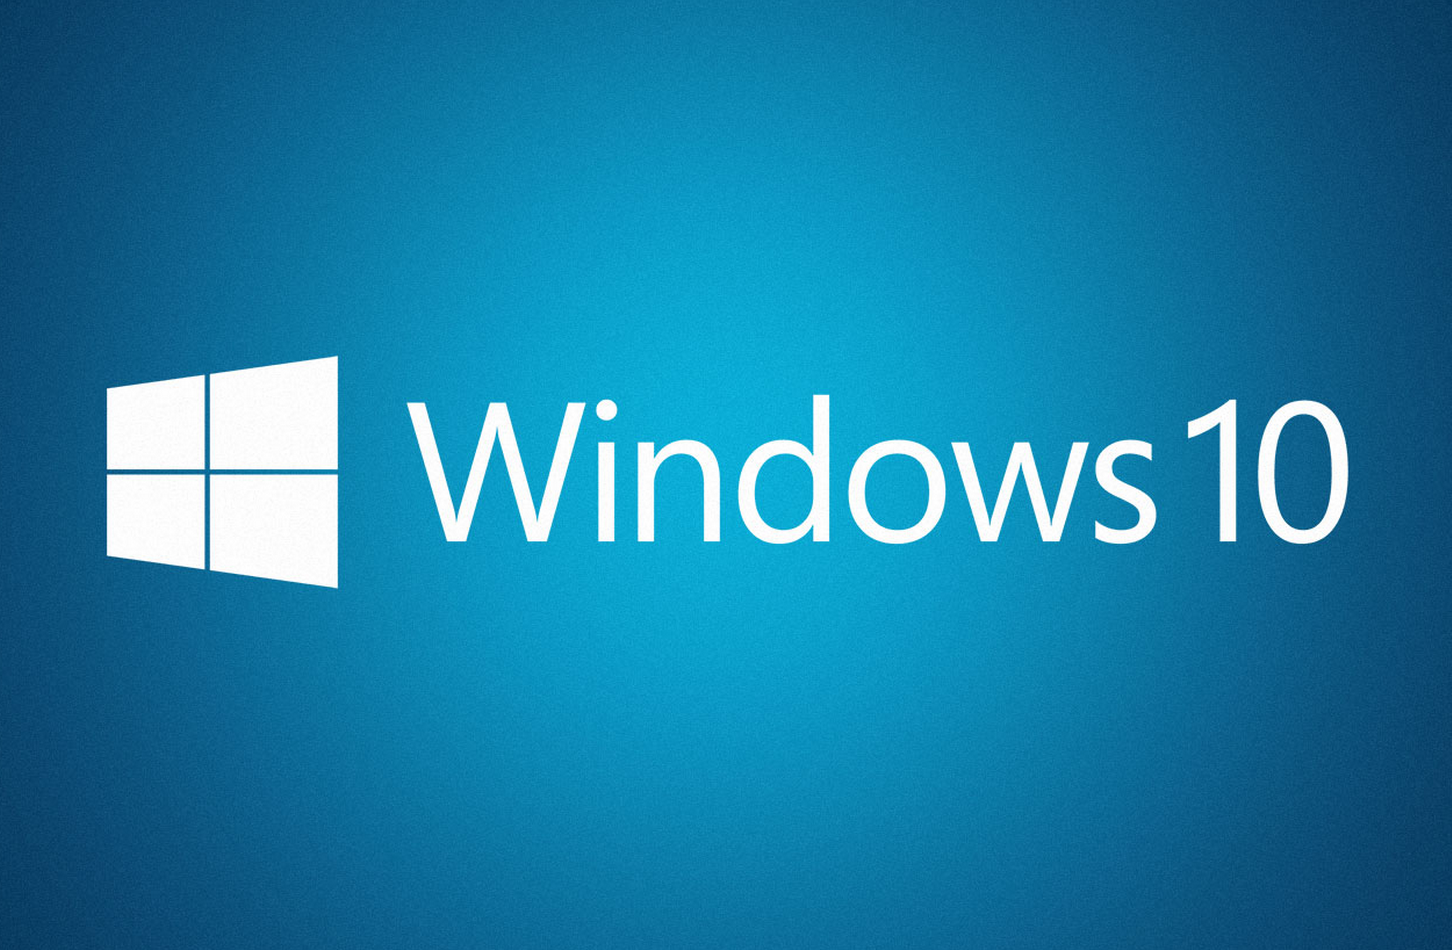 Windows 10: The next chapter